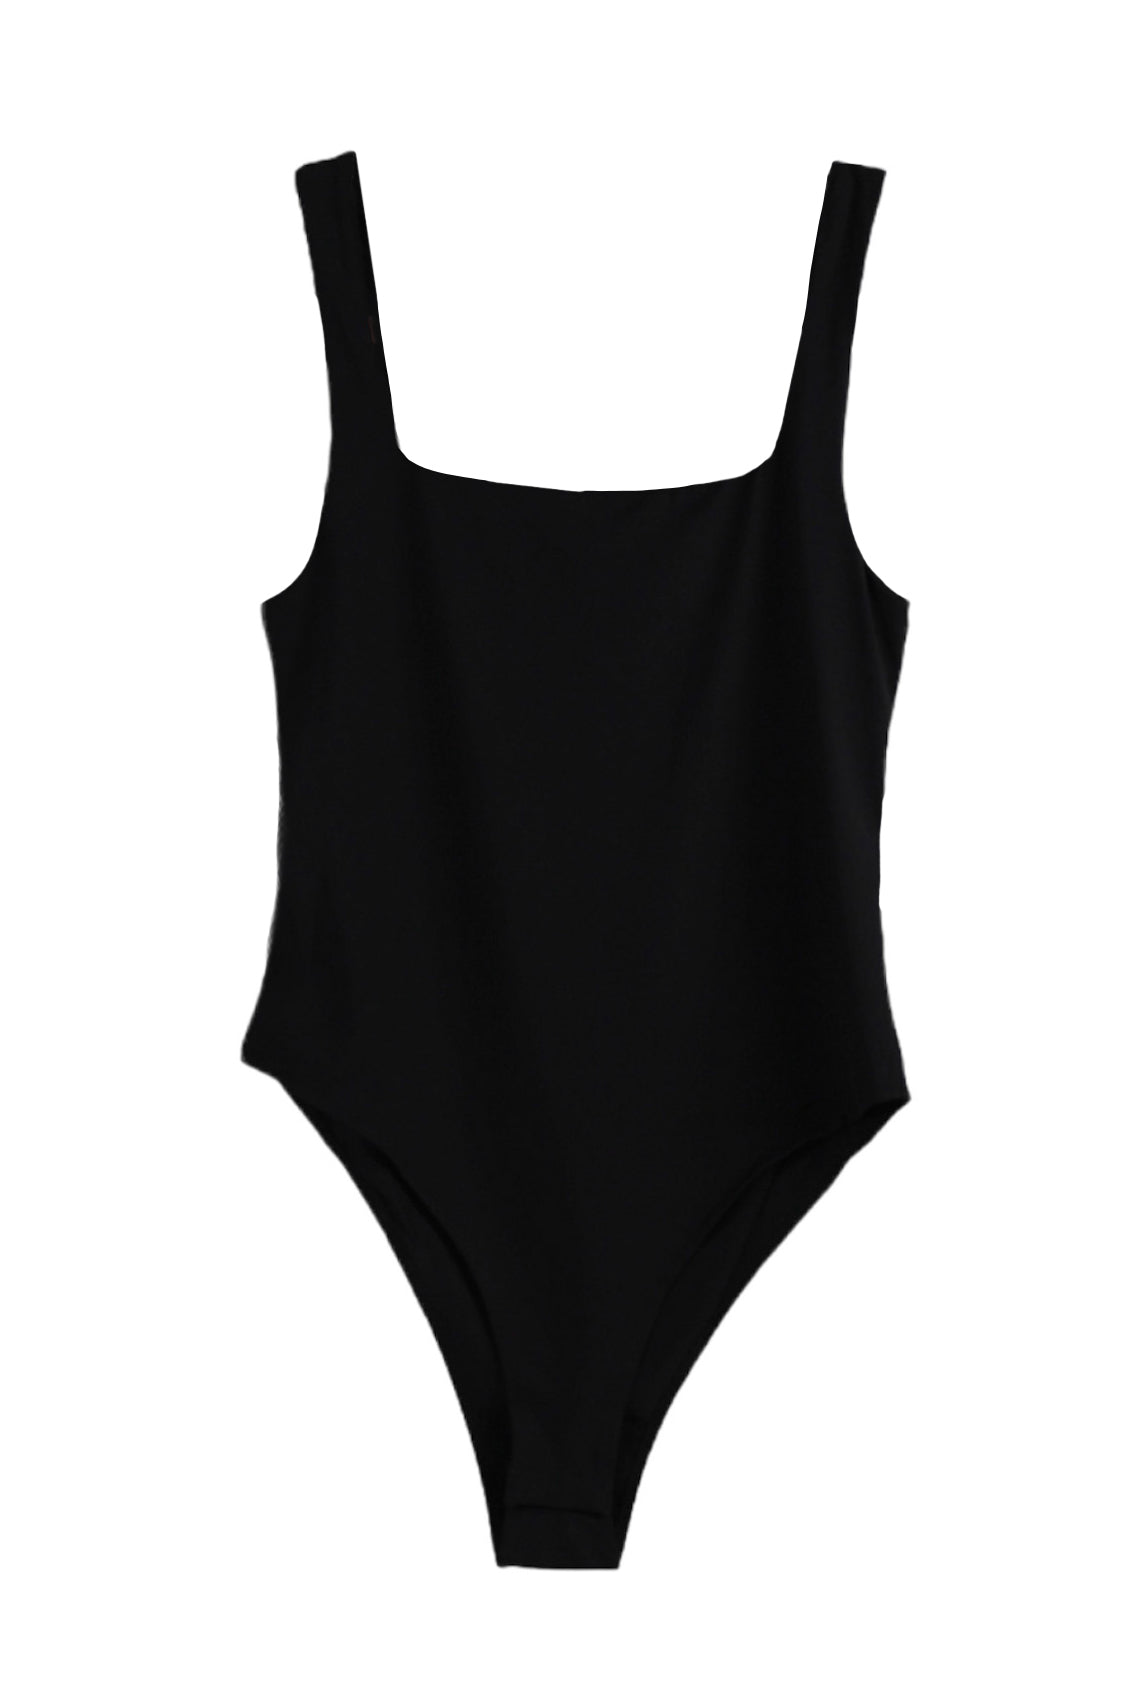 Load image into Gallery viewer, Glow Fashion Boutique Square neck black Bodysuit
